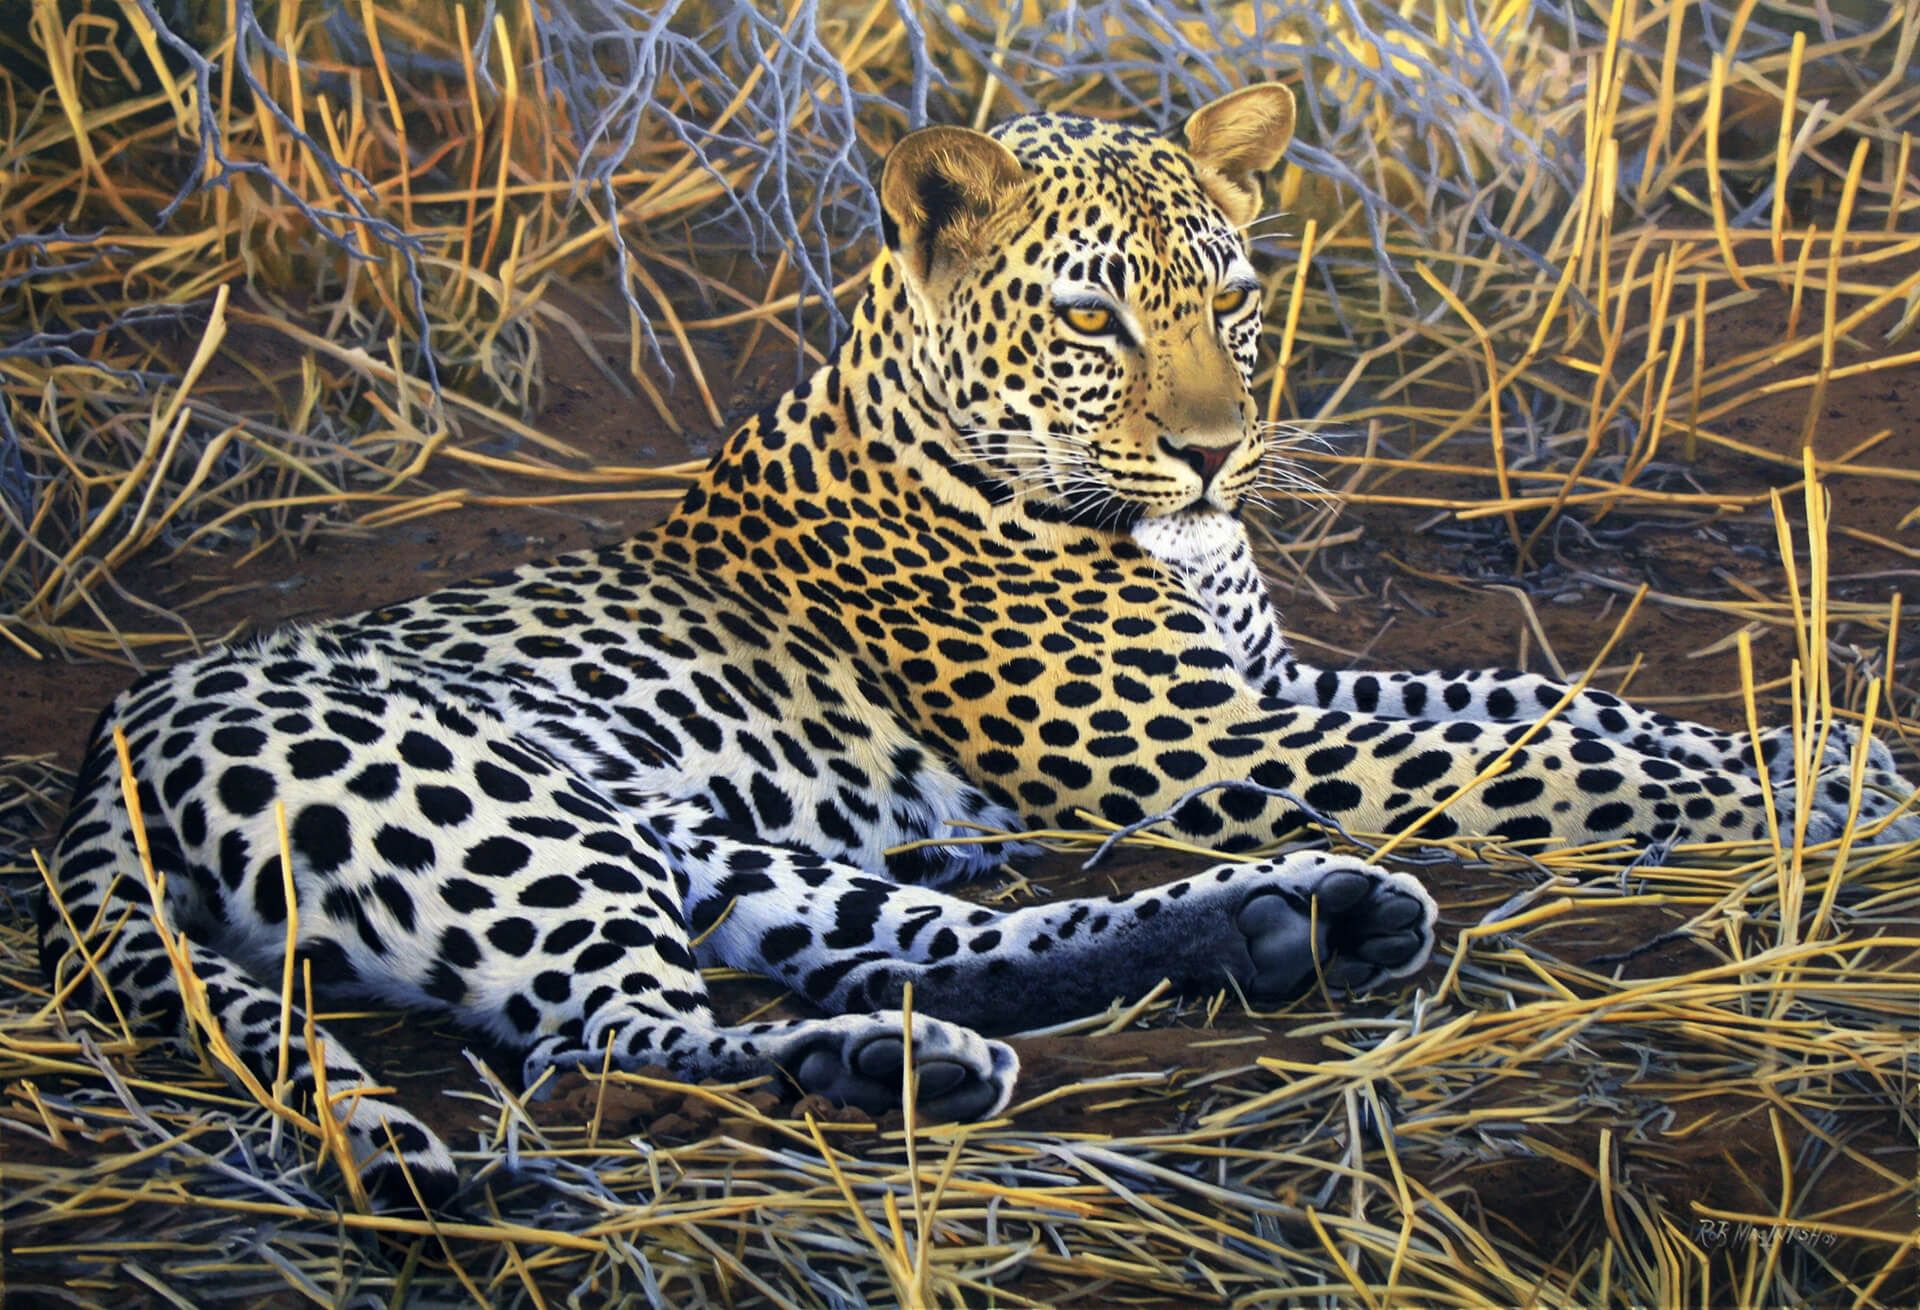 Photorealistic painting of a cheetah camouflaged in its background